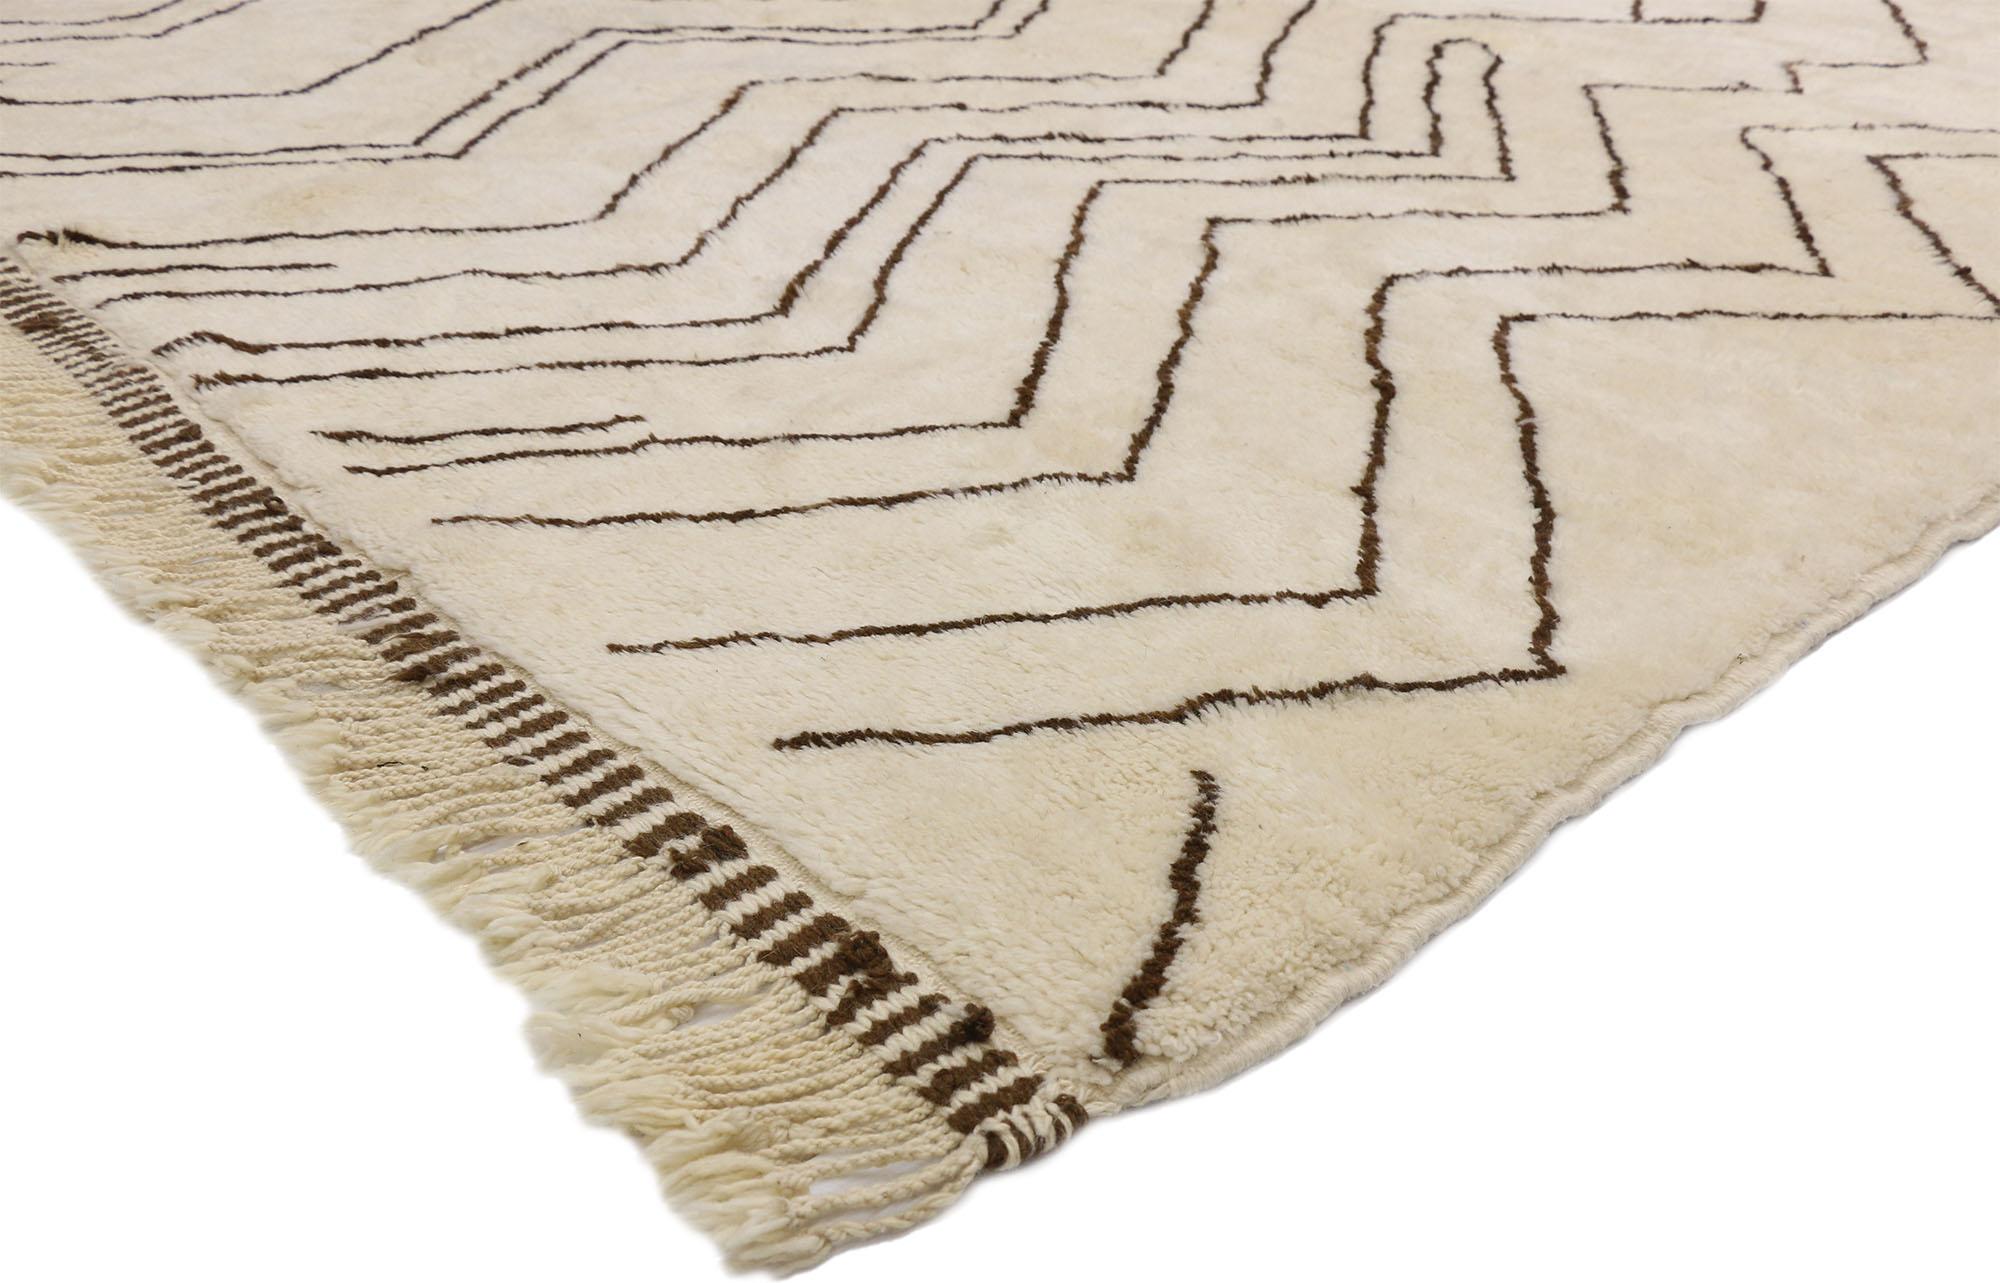 20807 New Contemporary Berber Moroccan Rug with Mid-Century Modern 09'04 x 11'02. This hand knotted wool contemporary Berber Moroccan rug features espresso-coffee colored lines run the length of the abrashed creamy-vanilla field in an organic